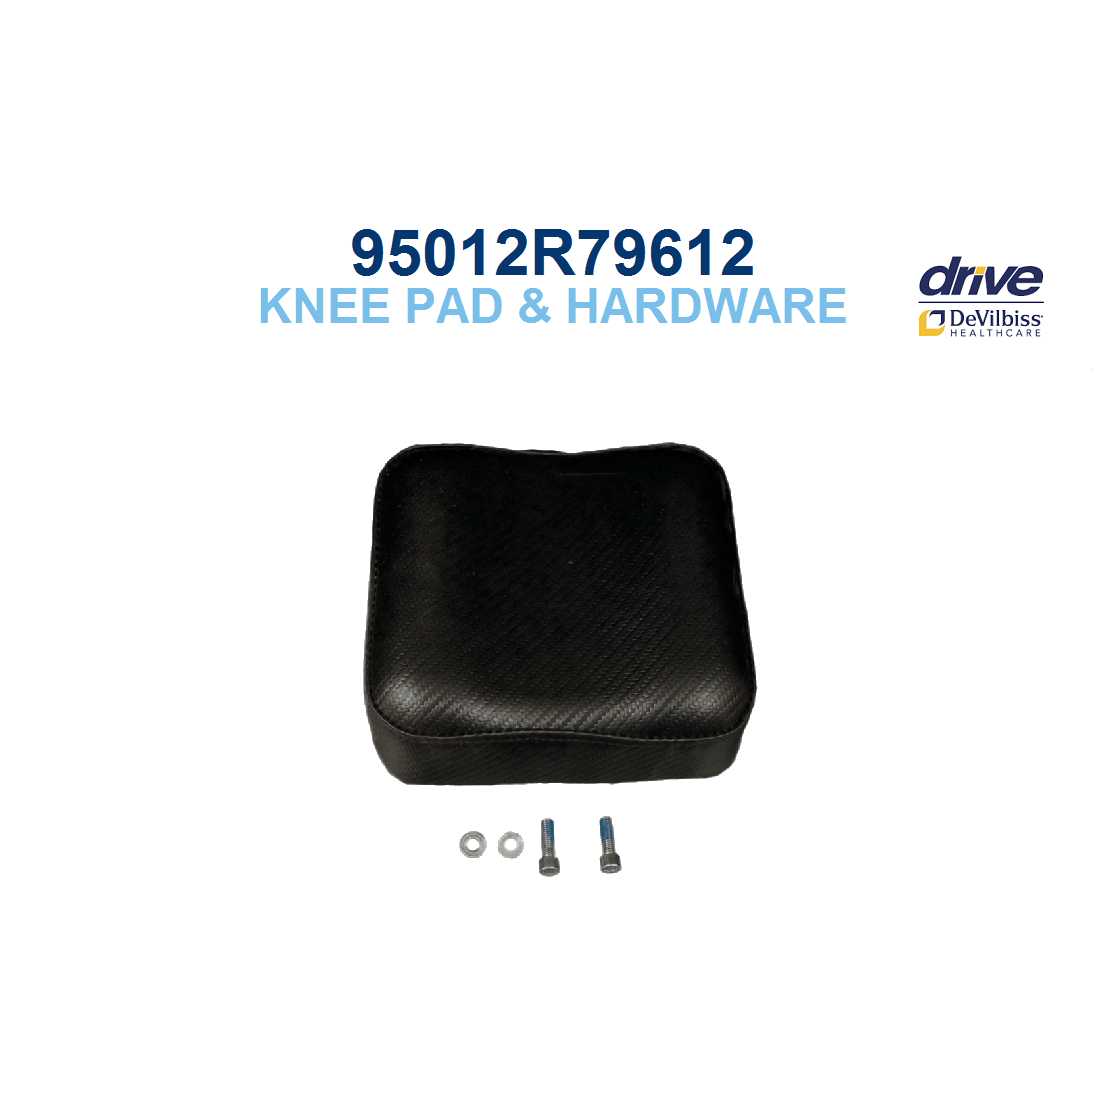 All replacement parts for Drive 796 Knee Walker, pick your part below